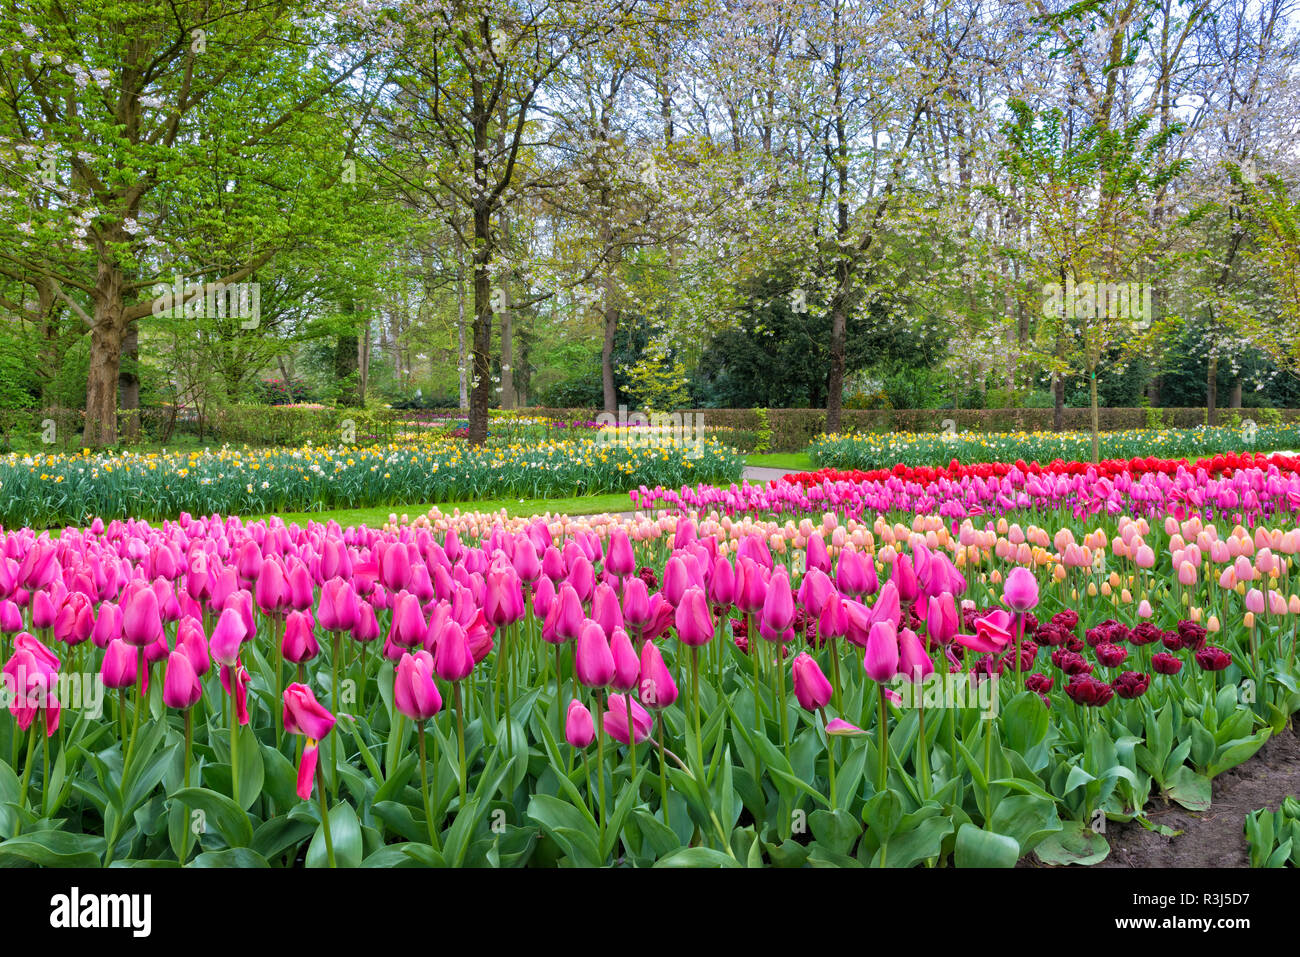 Flower garden with multi-colored tulips (tulipa) in bloom, Keukenhof Gardens Exhibit, Lisse, South Holland, The Netherlands Stock Photo